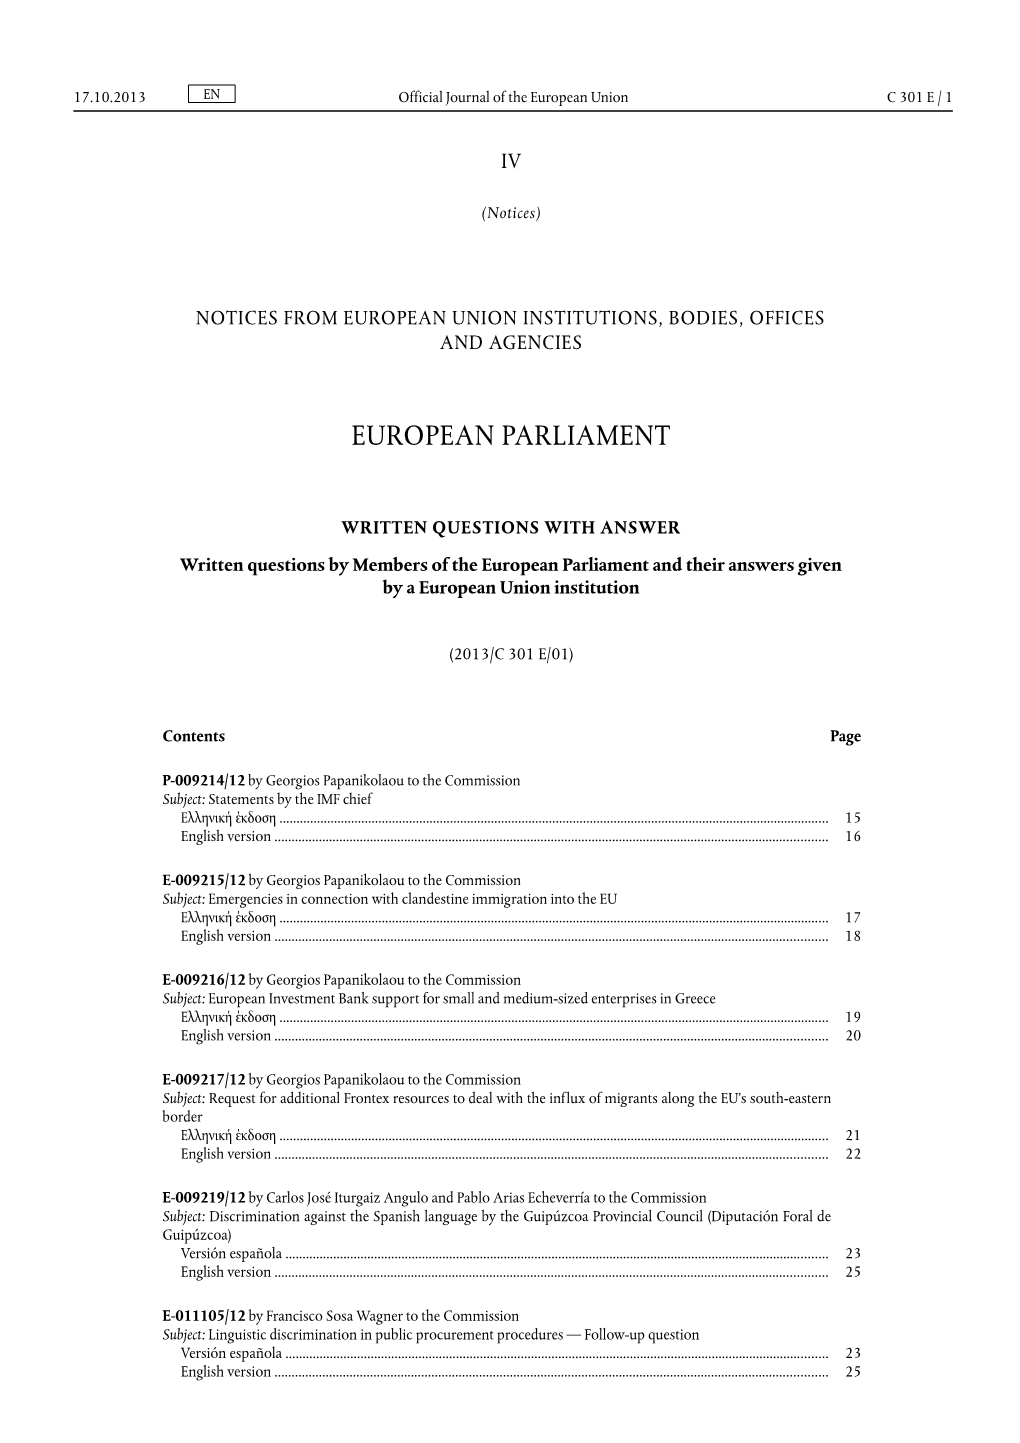 C 301 E / 1 Official Journal of the European Union 17.10.2013